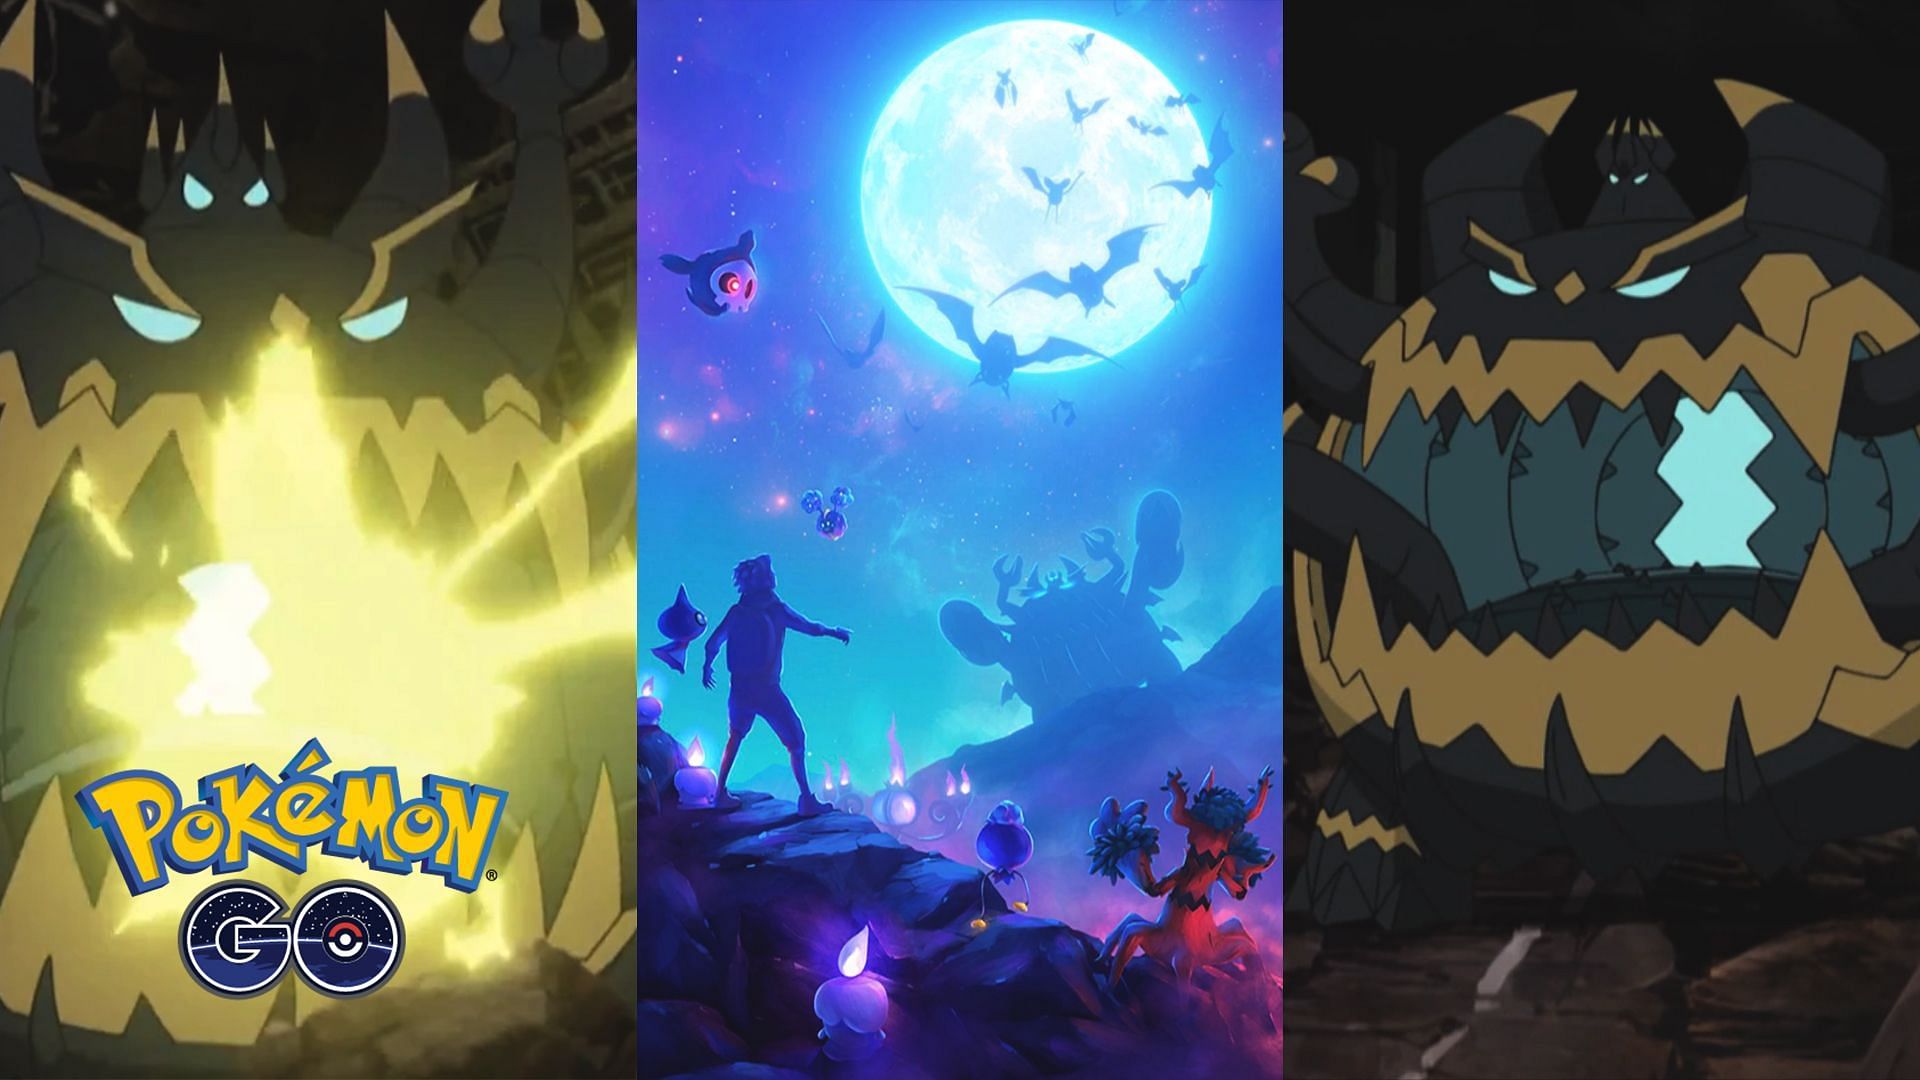 Guzzlord is coming to the wreak havoc in the Halloween event (Image via The Pokemon Company)